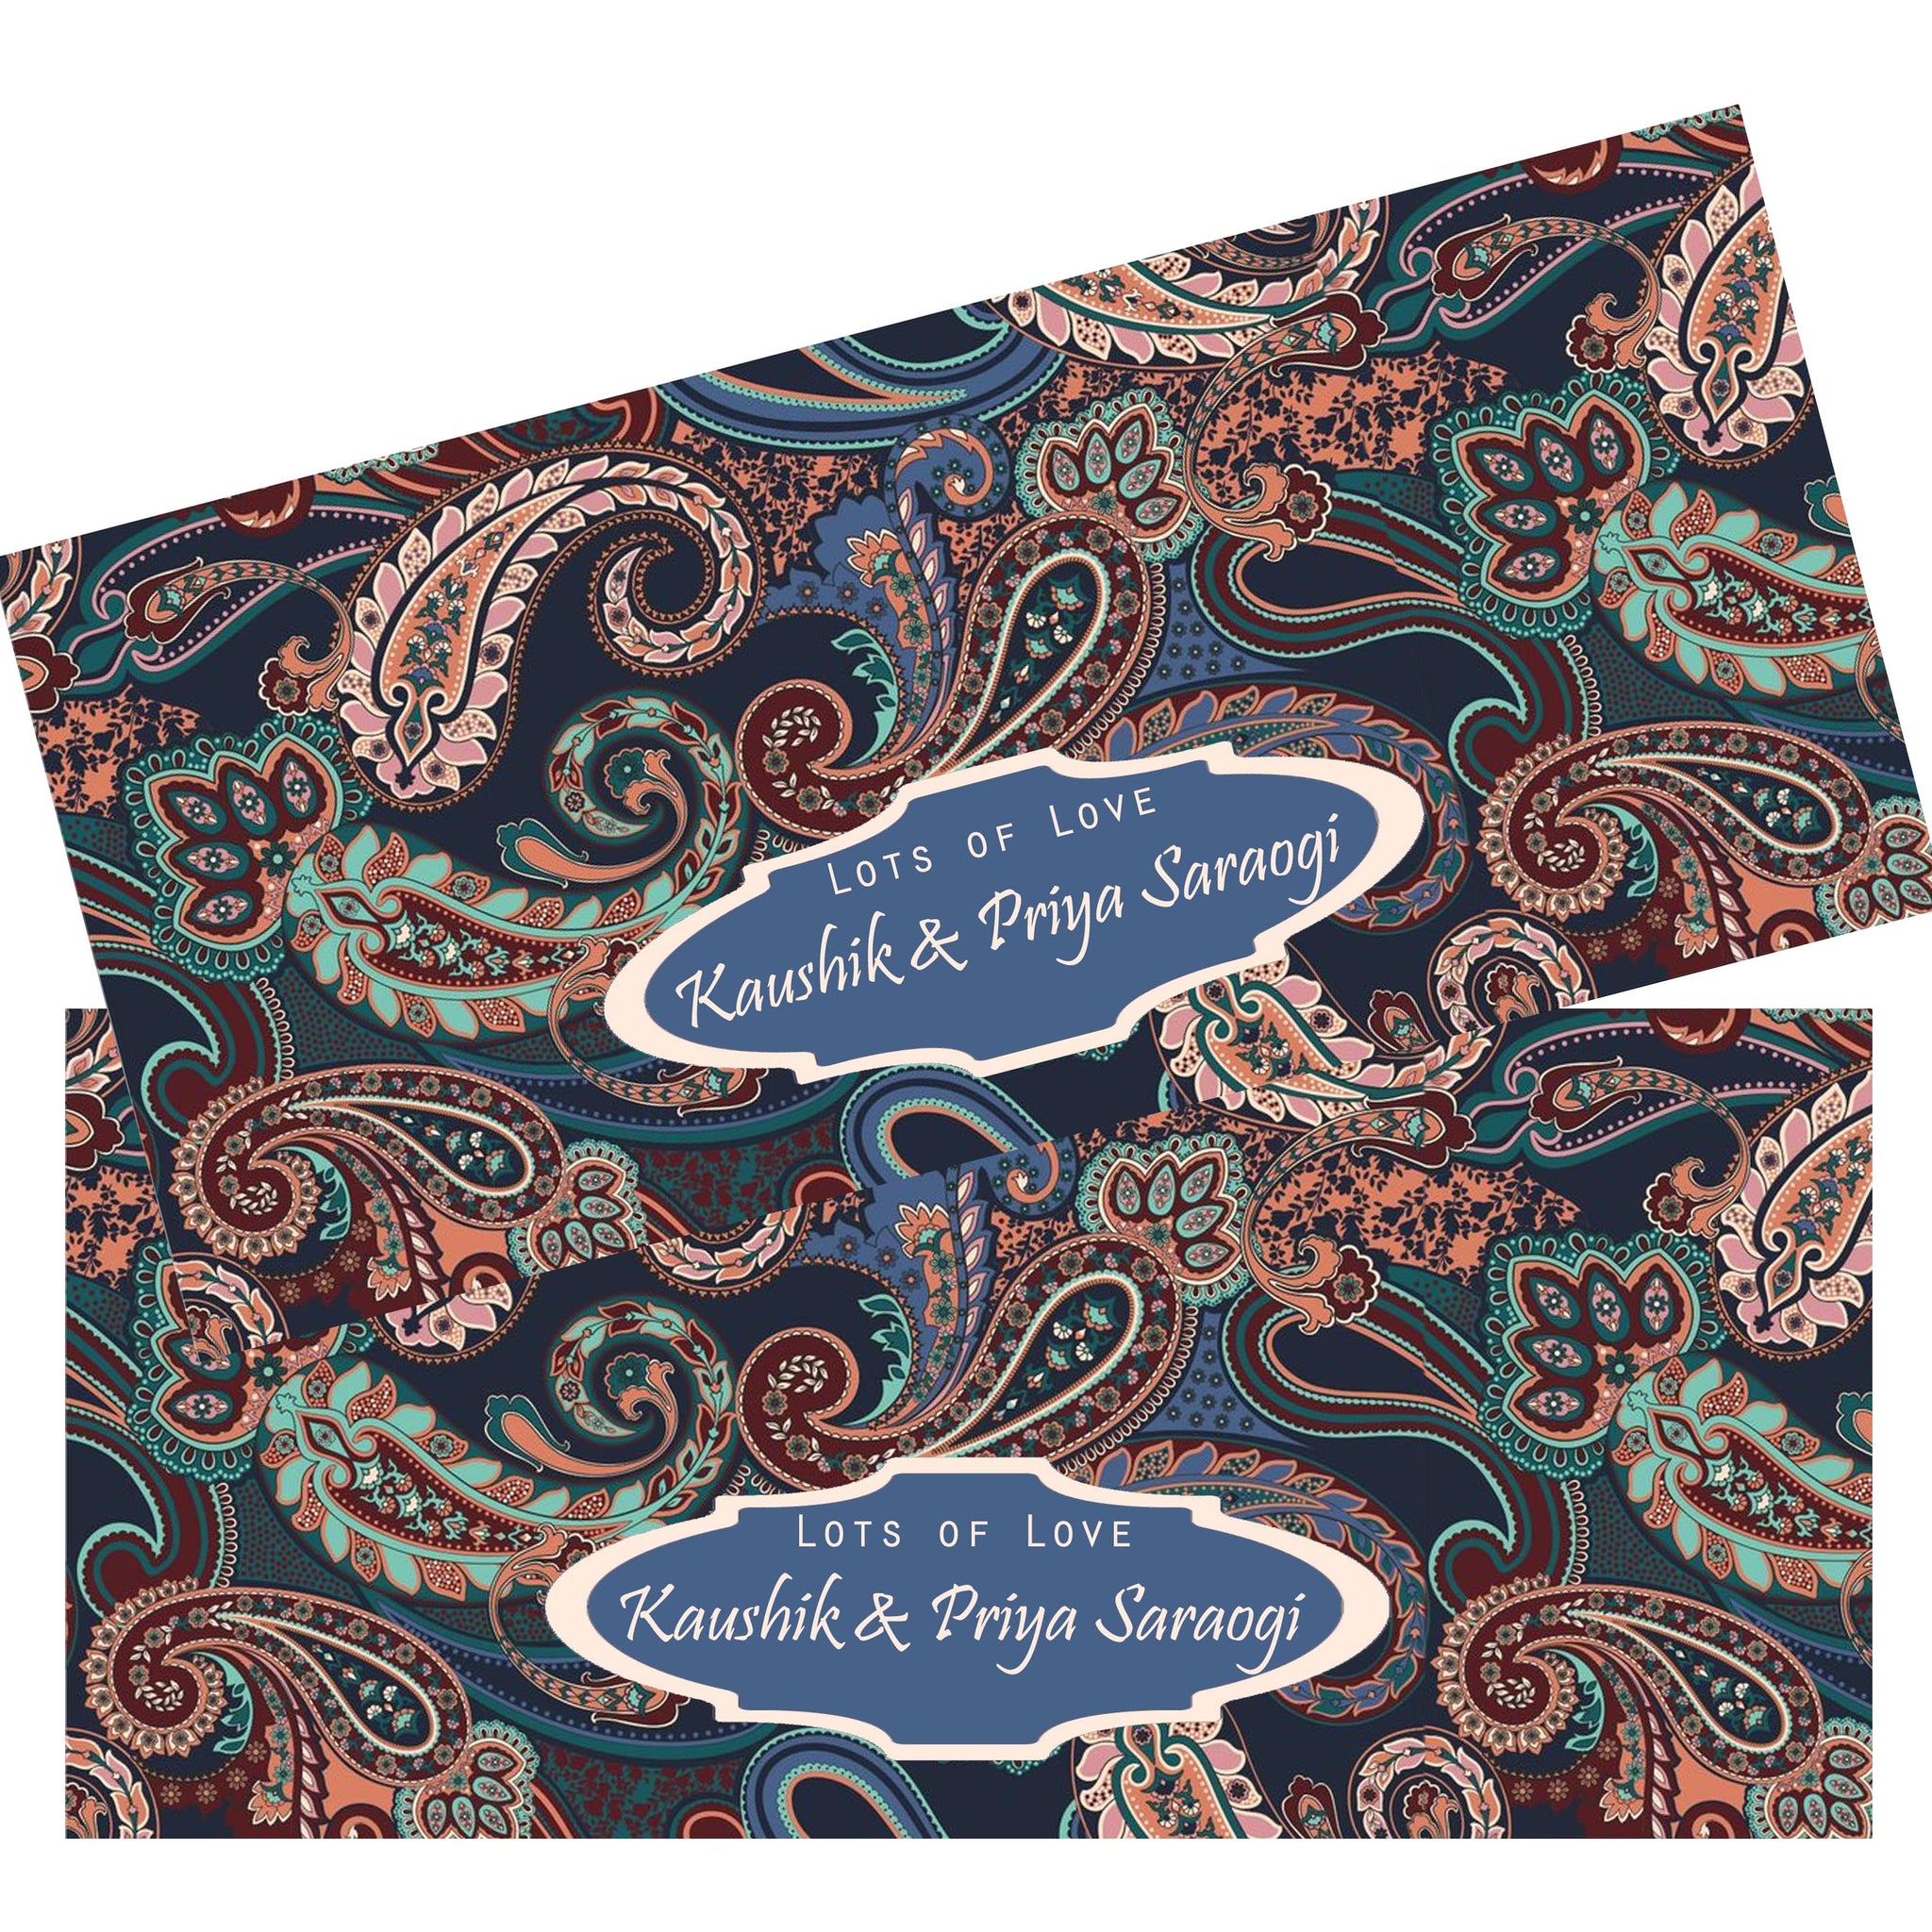 Personalised Money Envelopes - Persian Carpet Theme - Set of 20 Chatterbox Labels